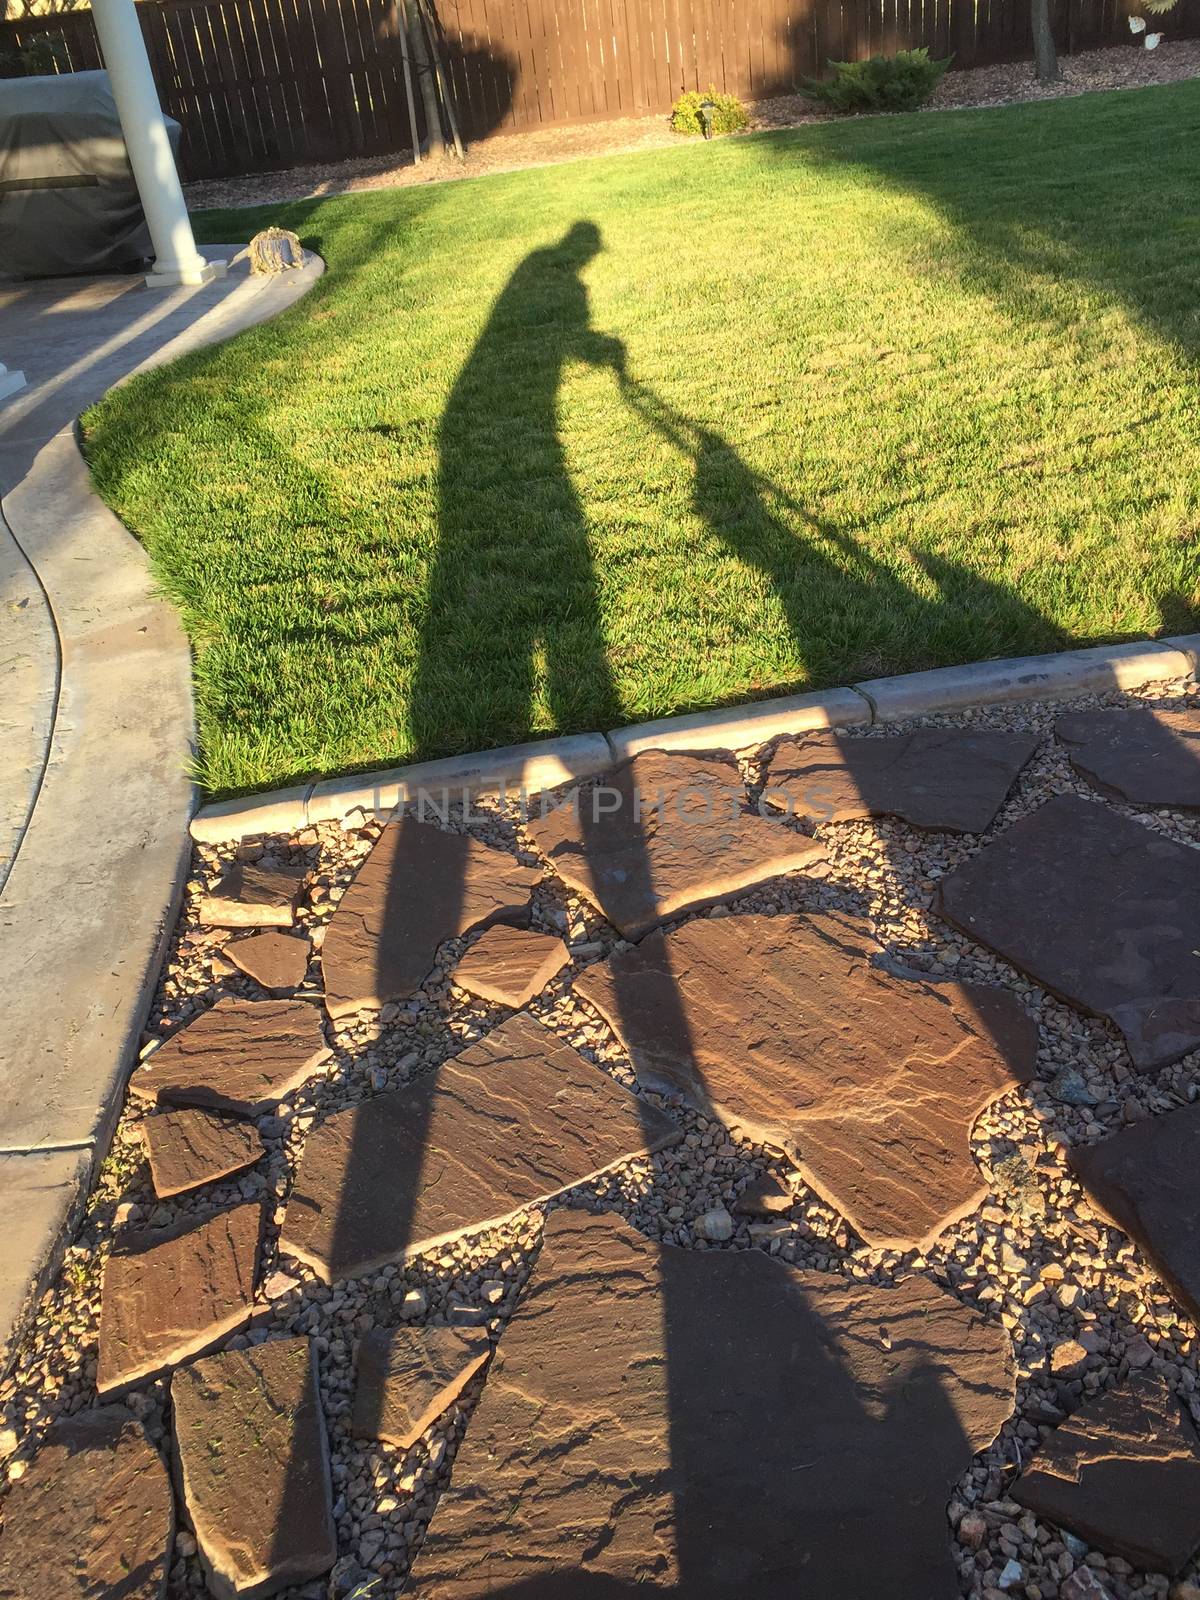 Shadow of Man Pushing Lawn Mower Over Grass by Feverpitched